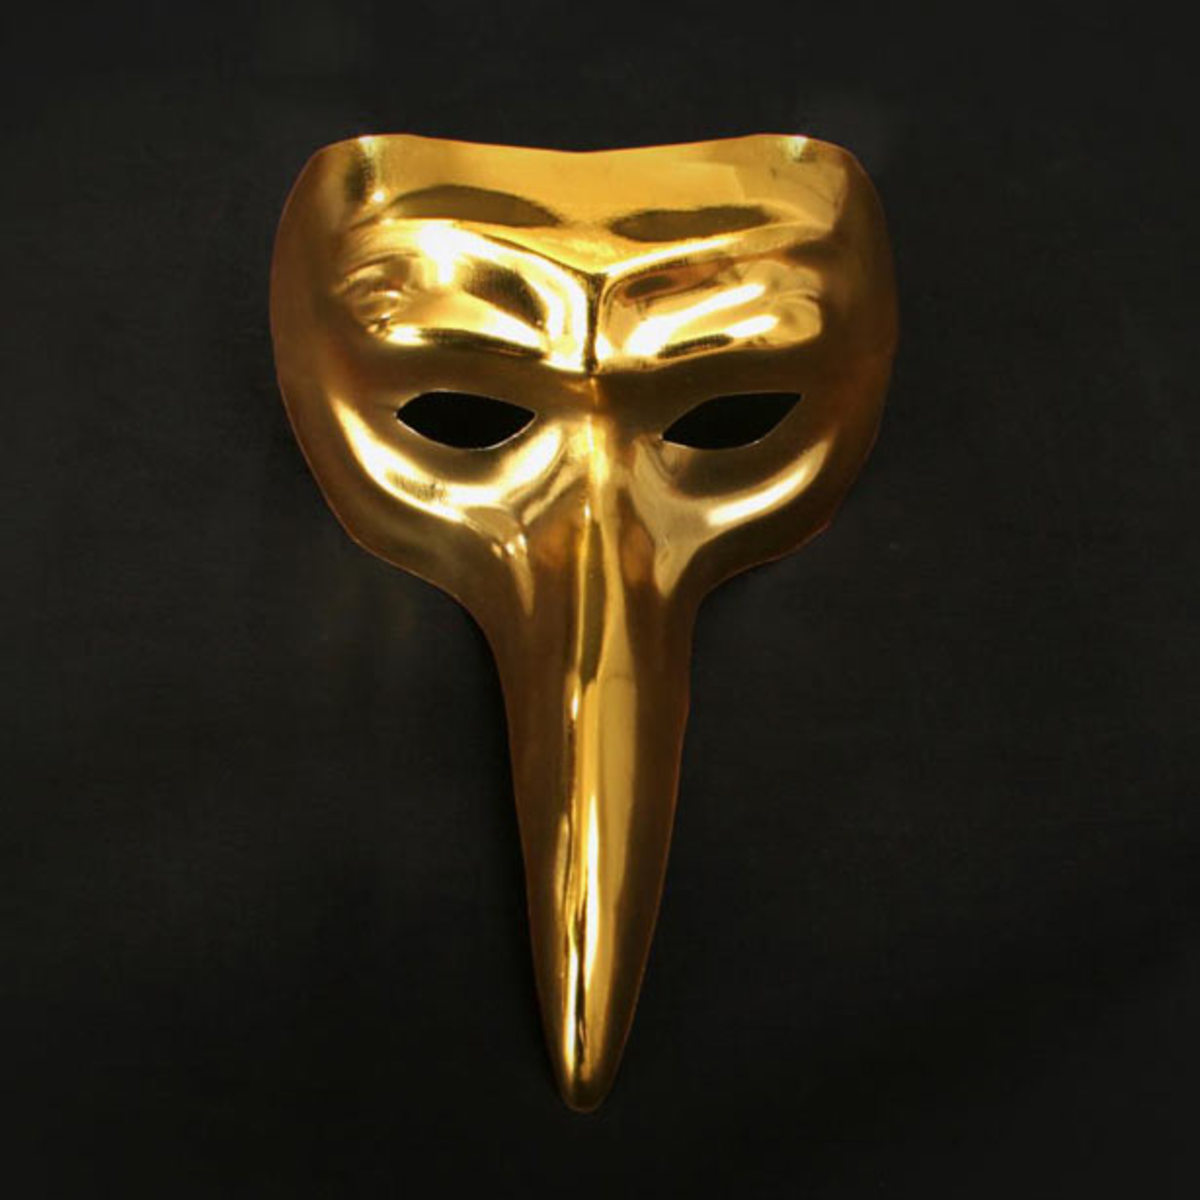 Stream: Dirty Minds “I’m For Pleasure” Claptone Vocal and Dub Mix